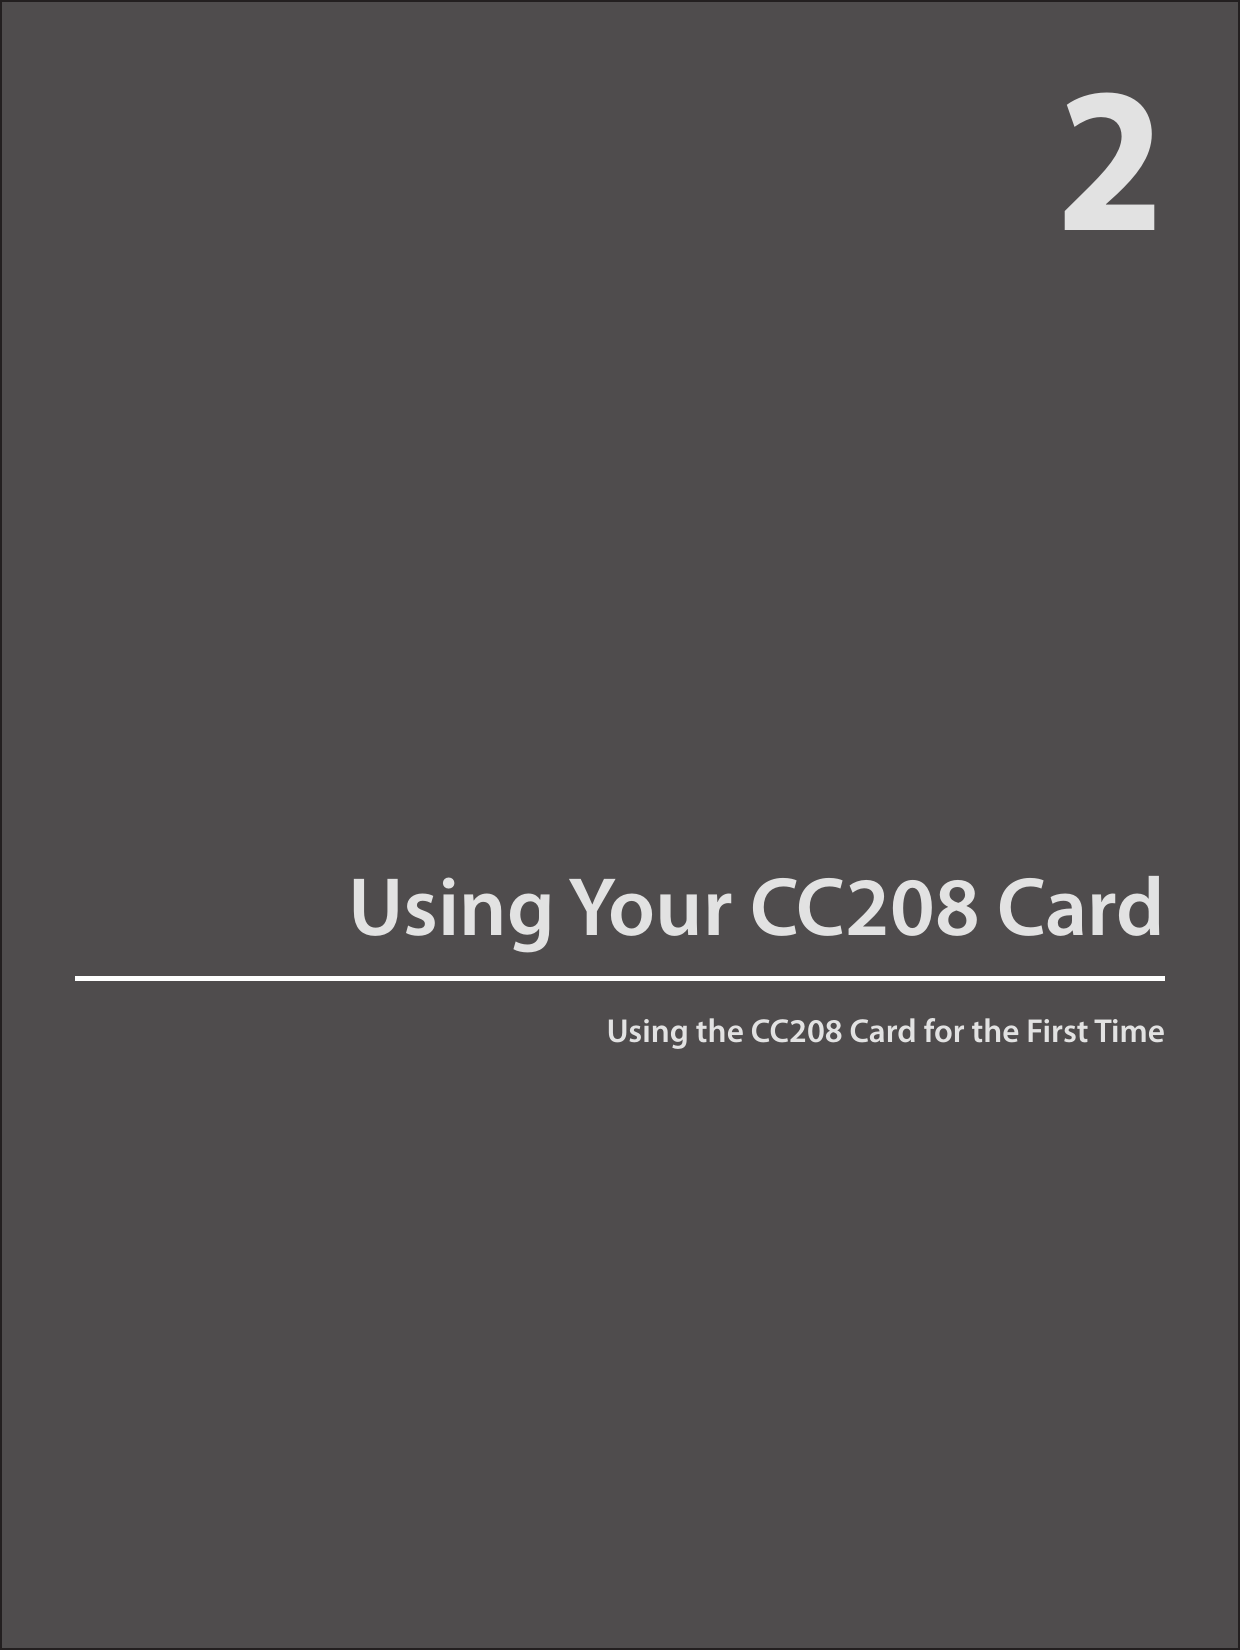 2Using Your CC208 CardUsing the CC208 Card for the First Time